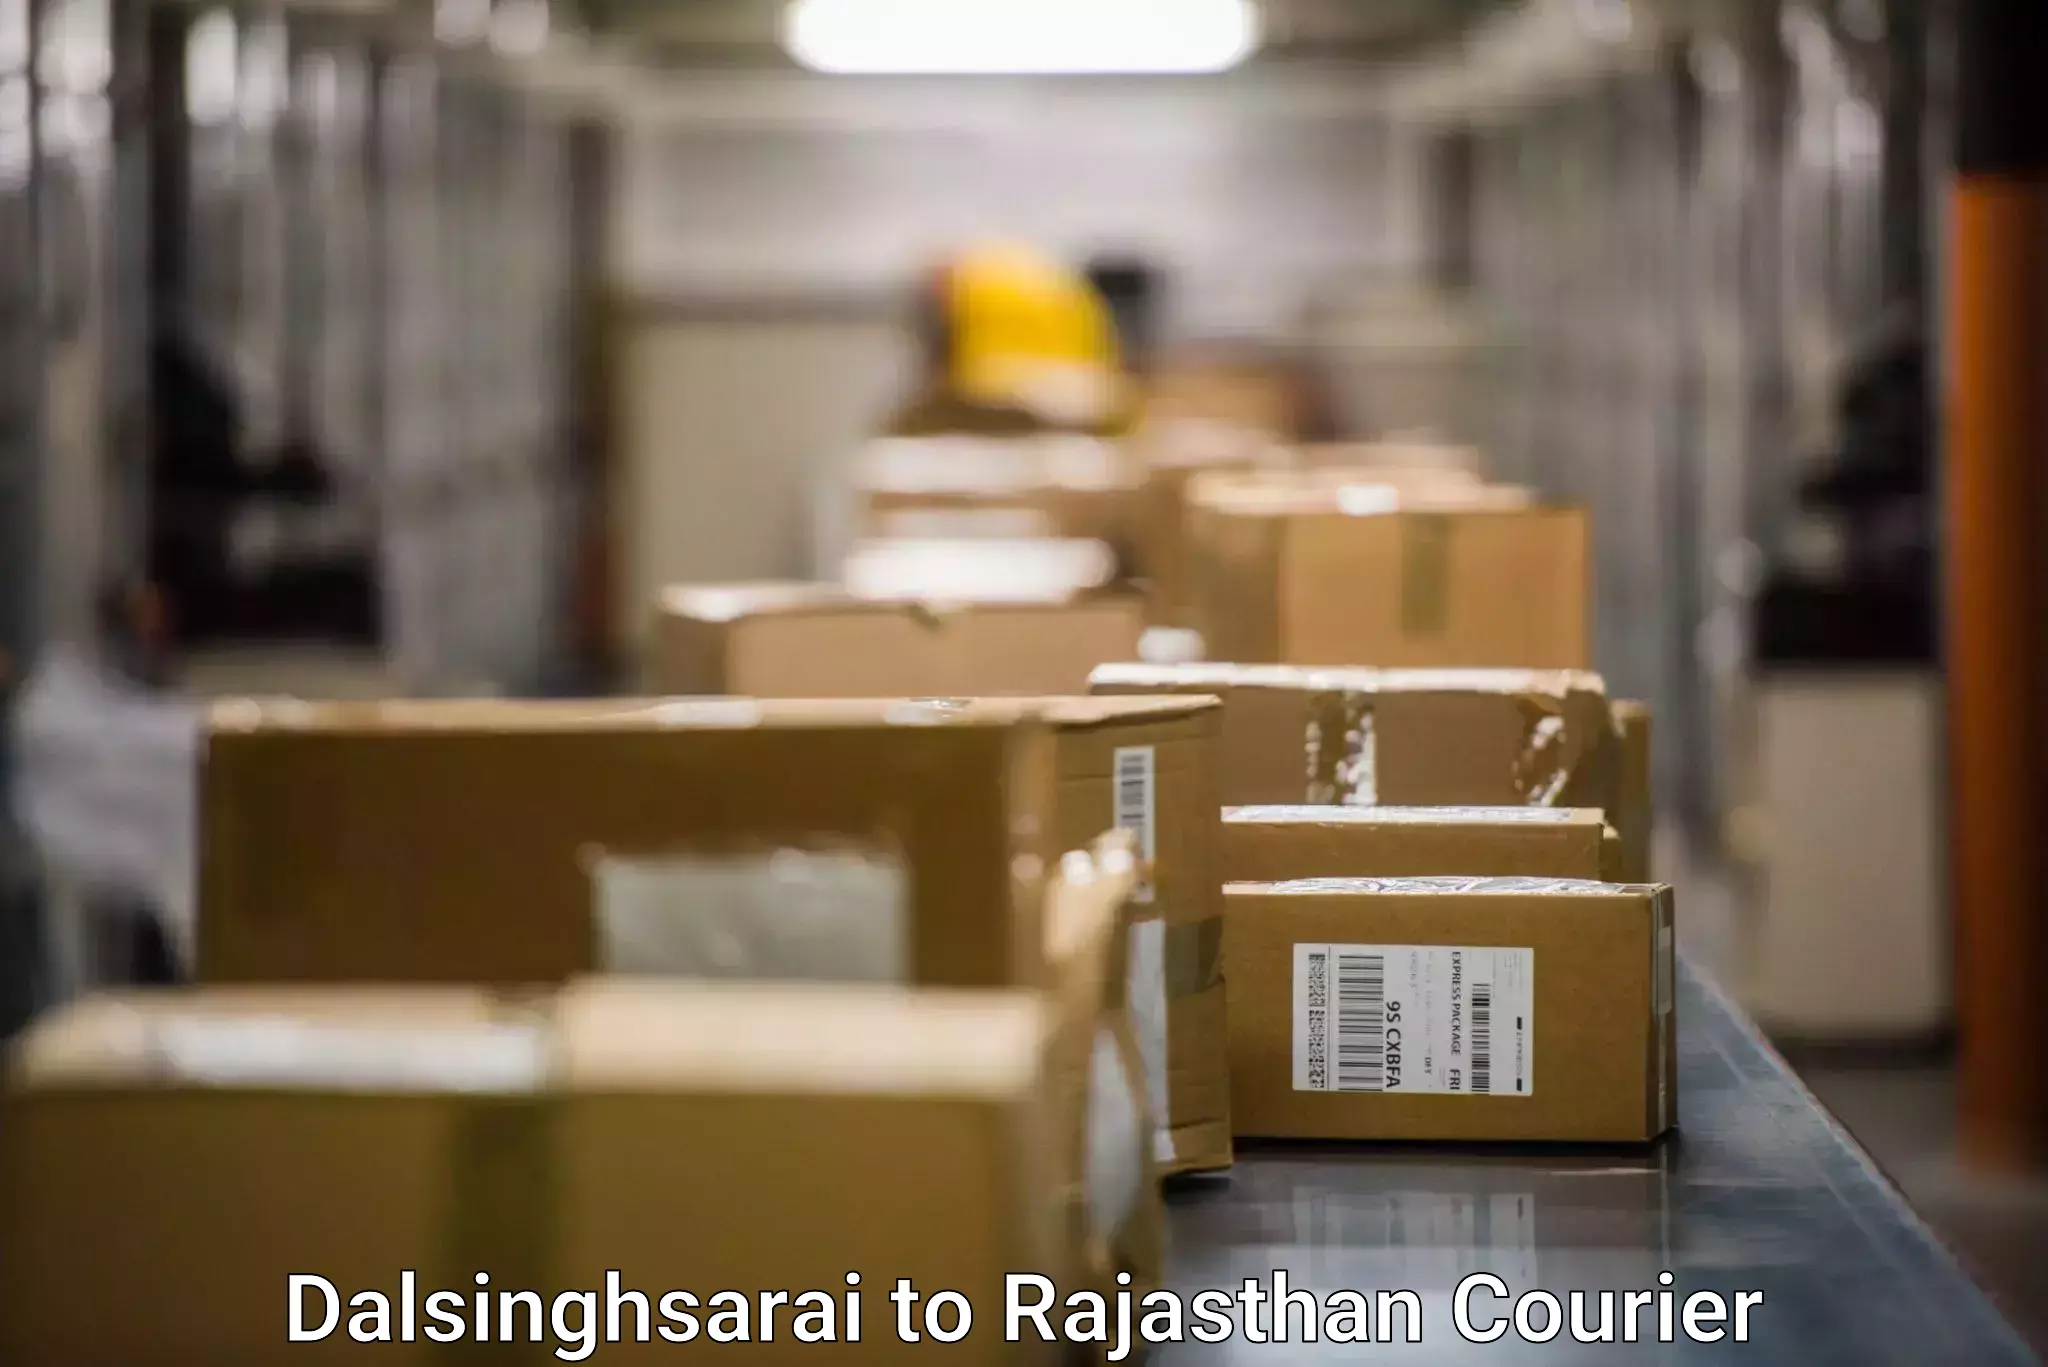 Large-scale shipping solutions Dalsinghsarai to Ghatol